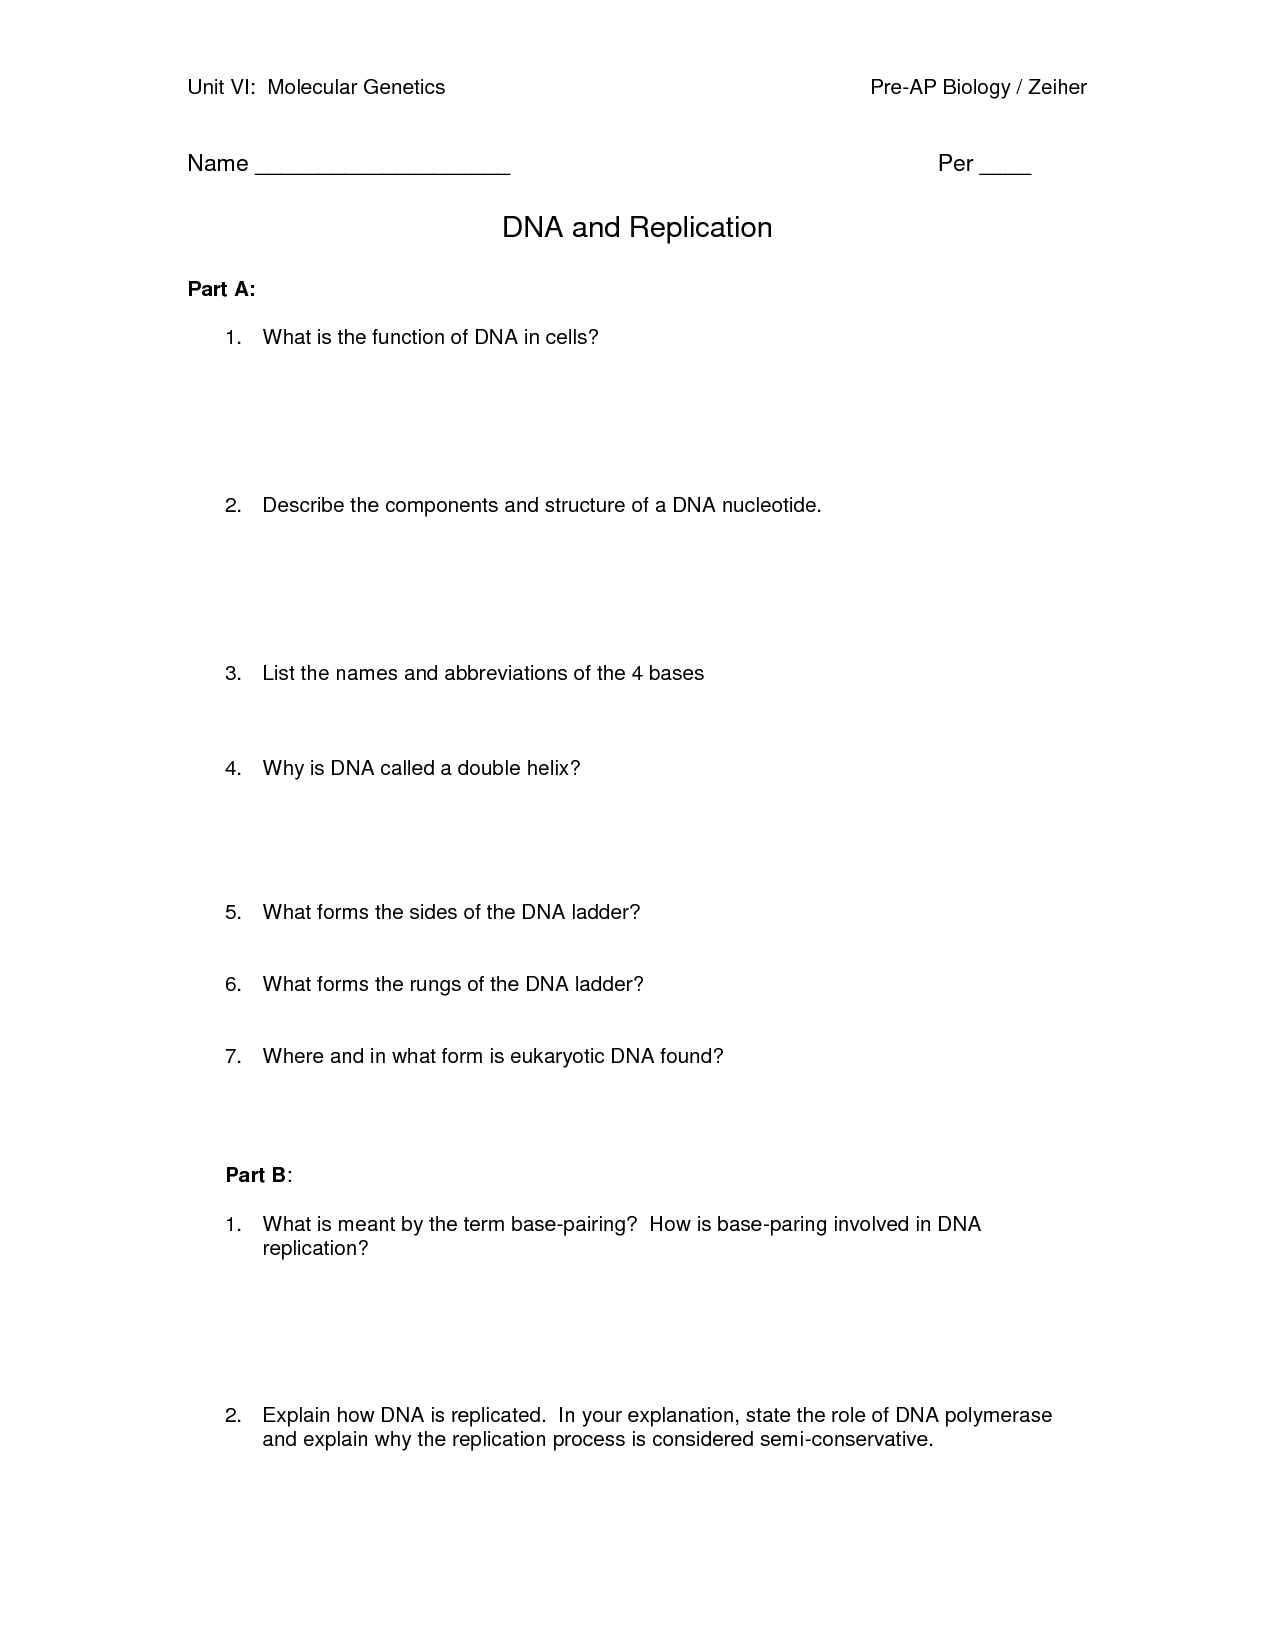 DNA Structure and Replication Worksheet Image